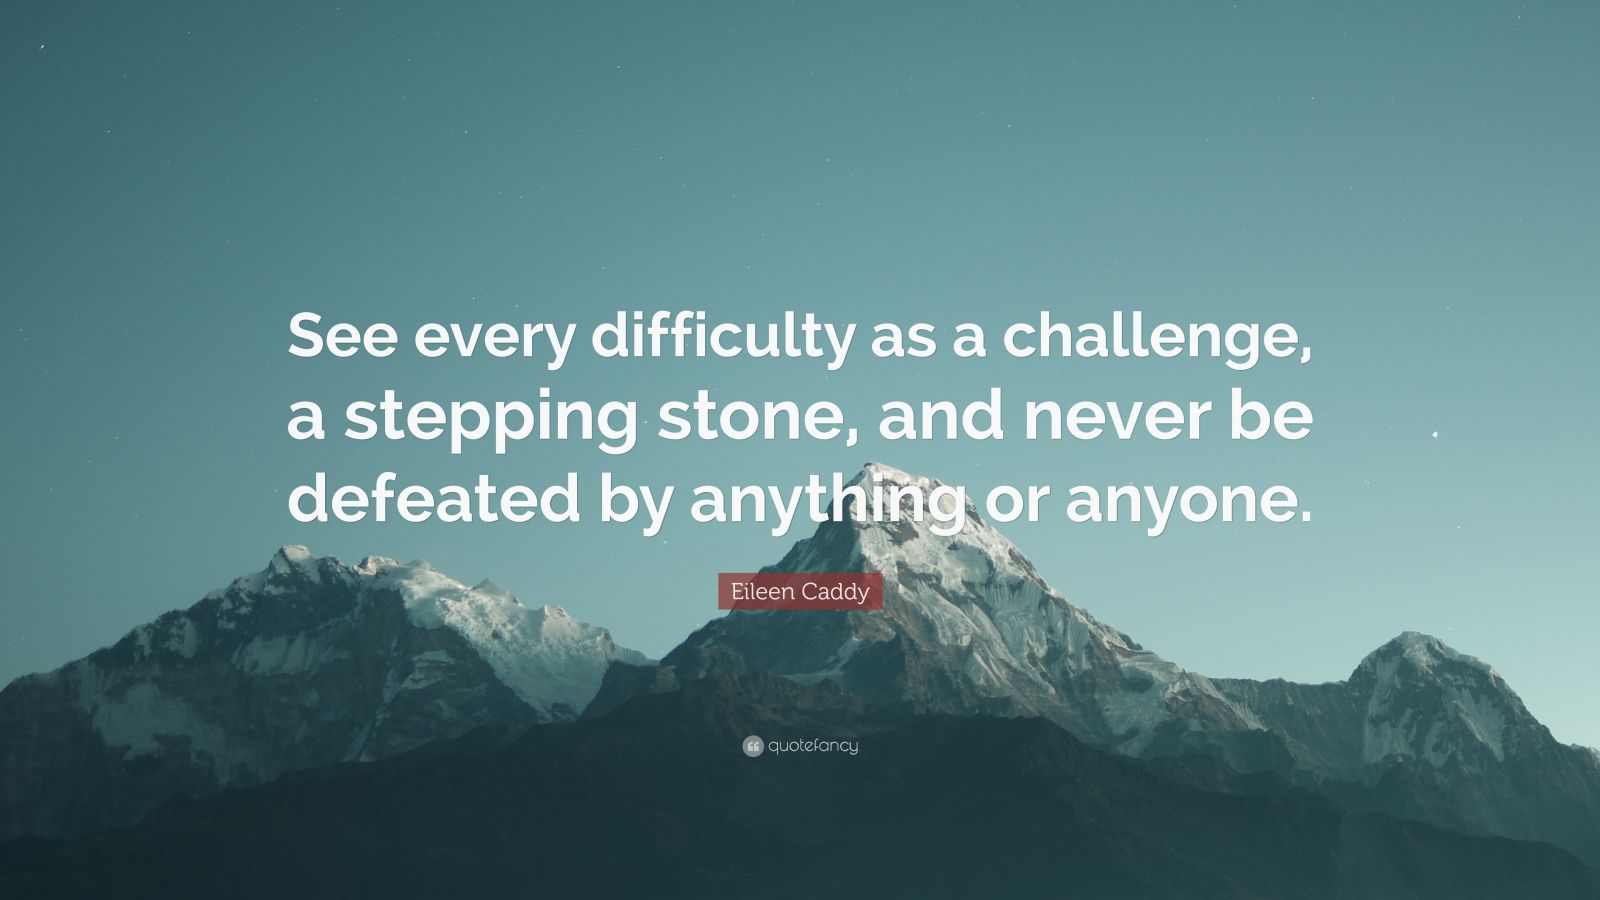 Eileen Caddy Quote: “See every difficulty as a challenge, a stepping ...